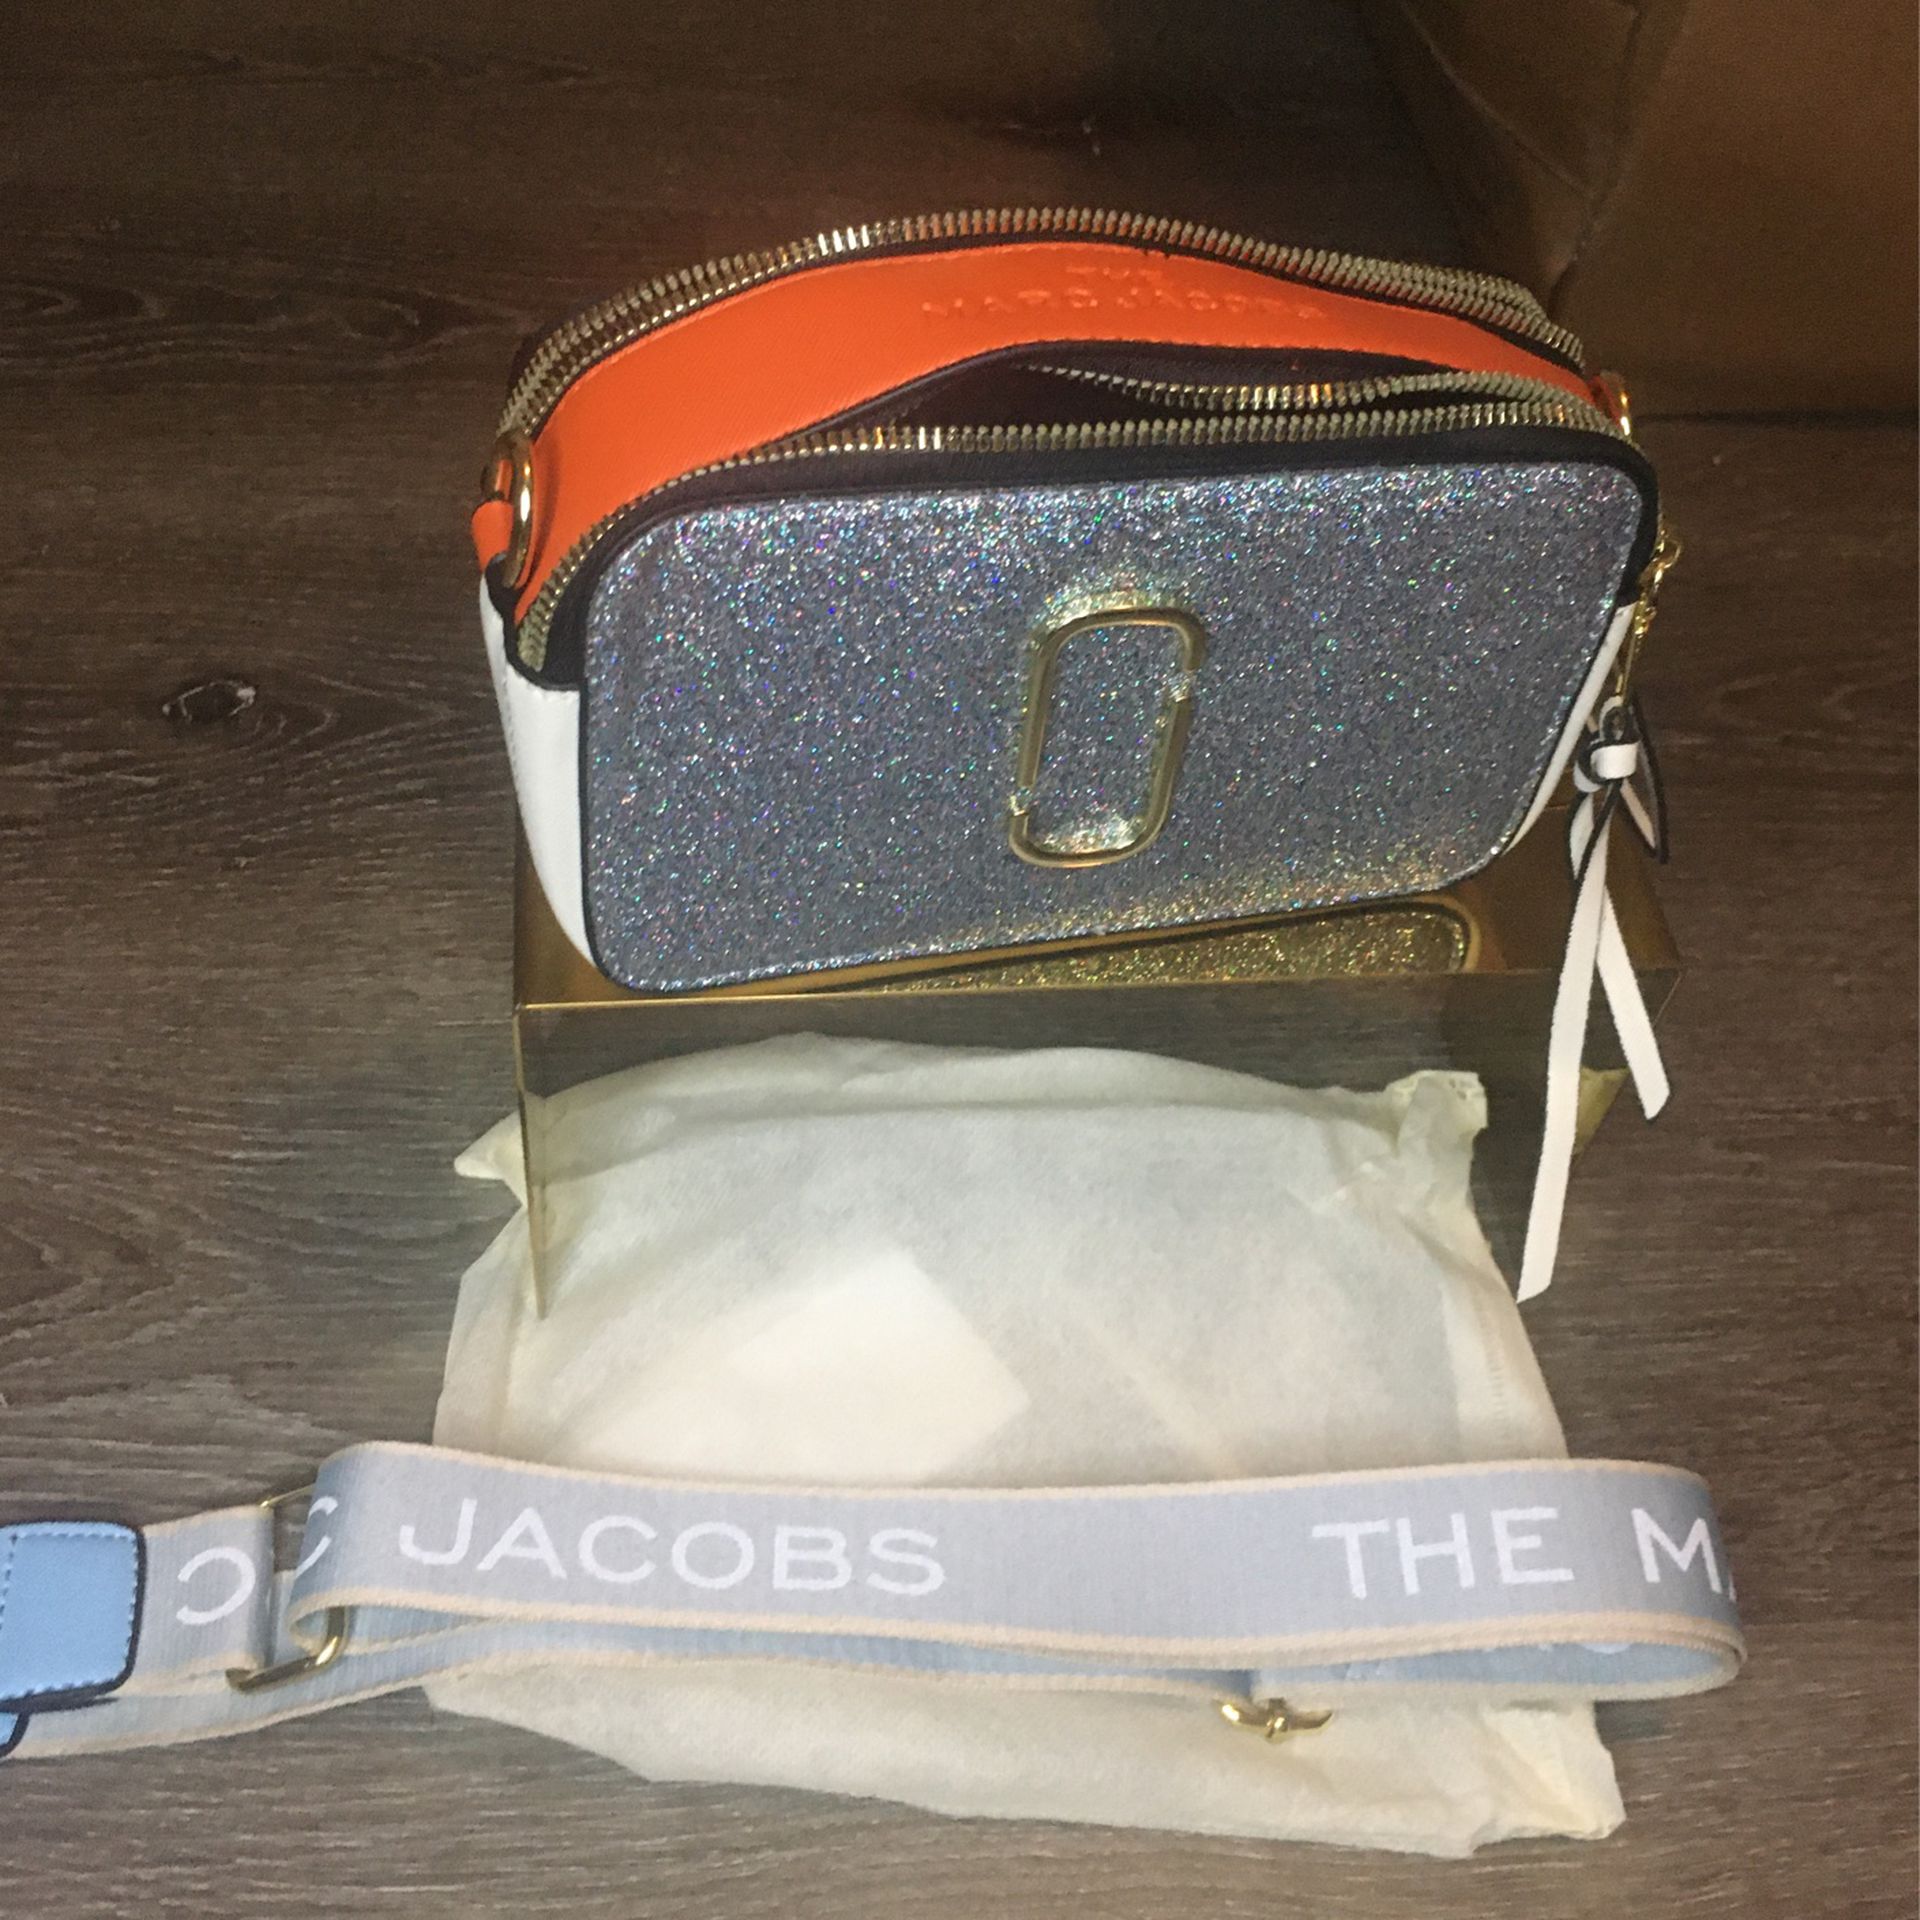 The Marc Jacobs Bag